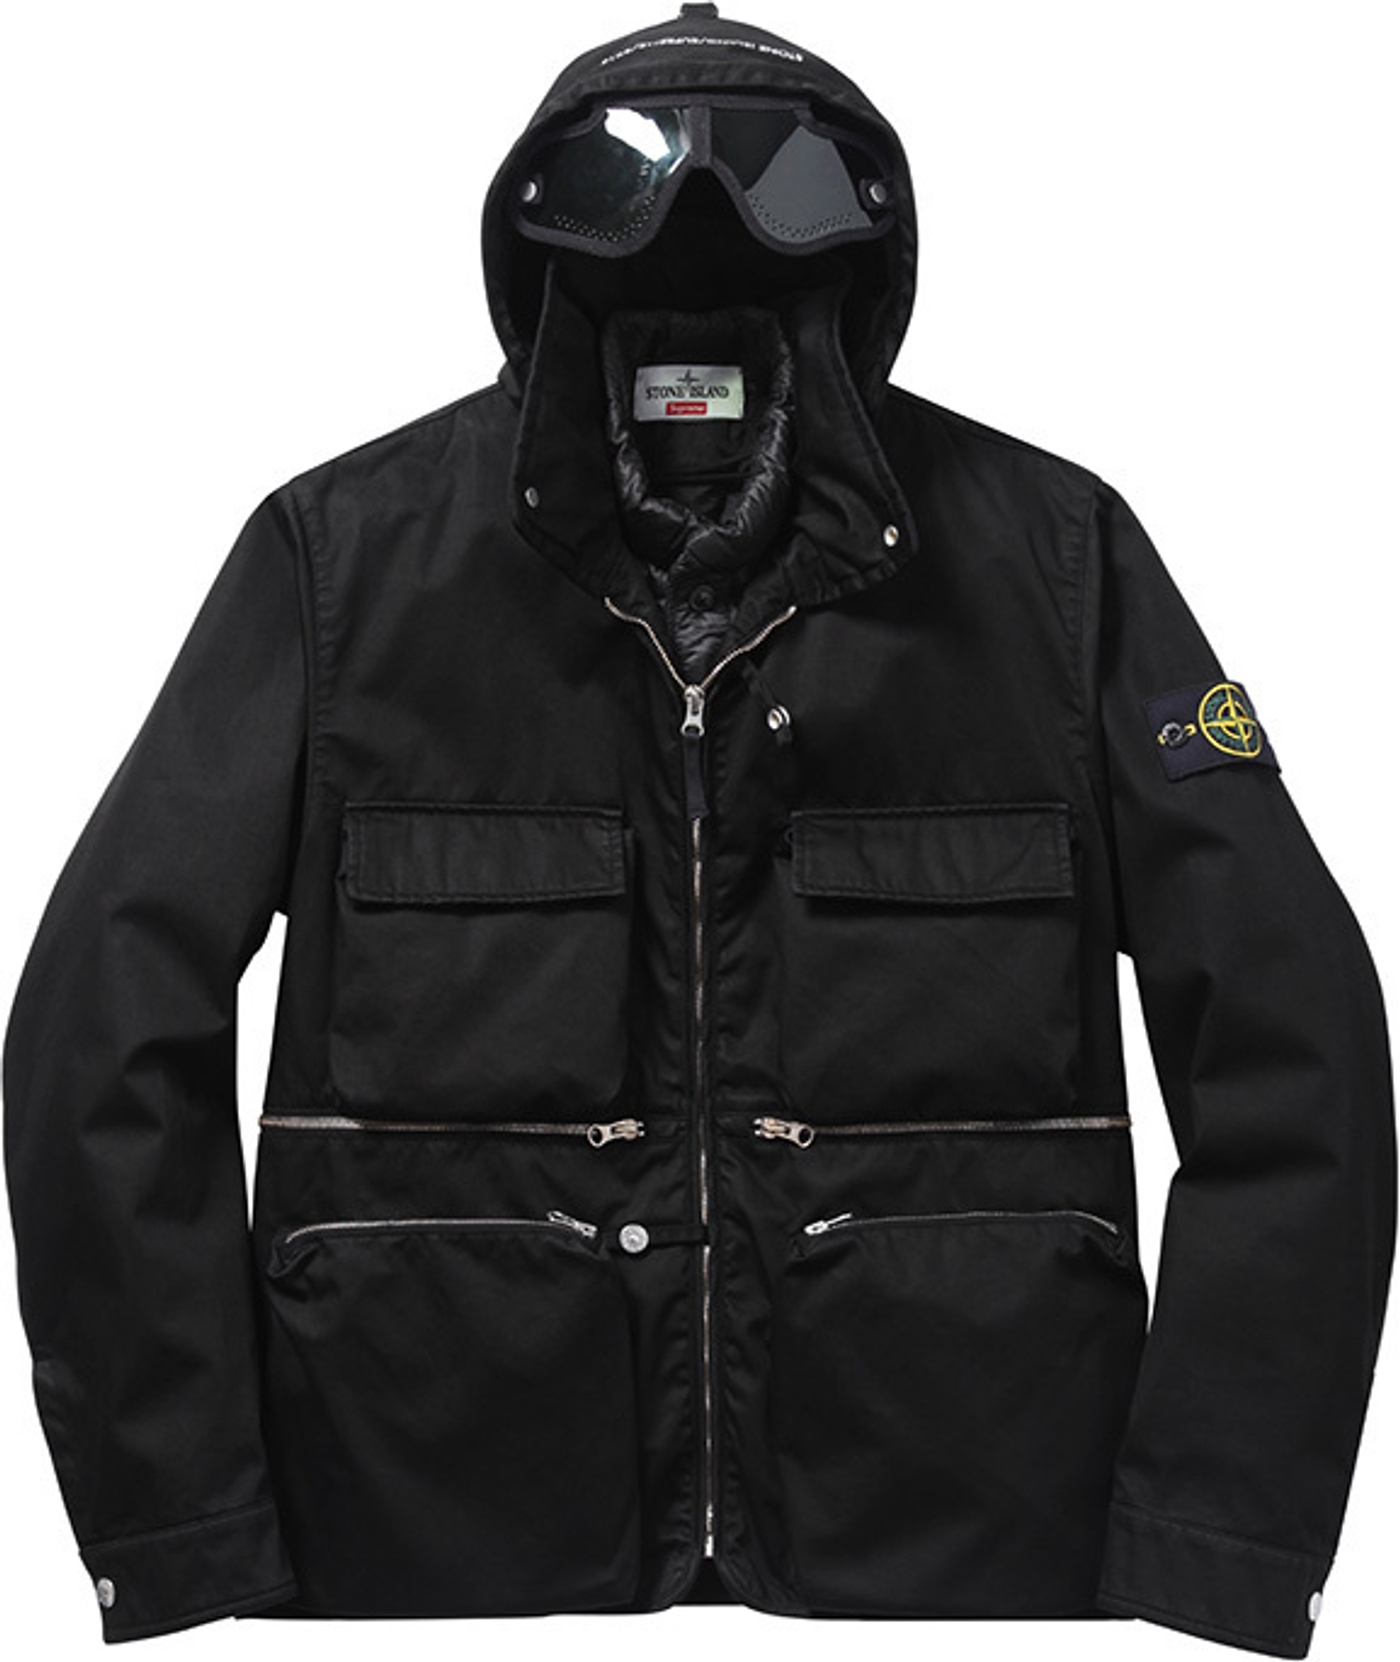 Raso Gommato Cover Nero Jacket 
Wind and water-resistant cotton with removable down liner. Removable eye mask with stow away hood.<br>
Made by Stone Island<br> (19/36)